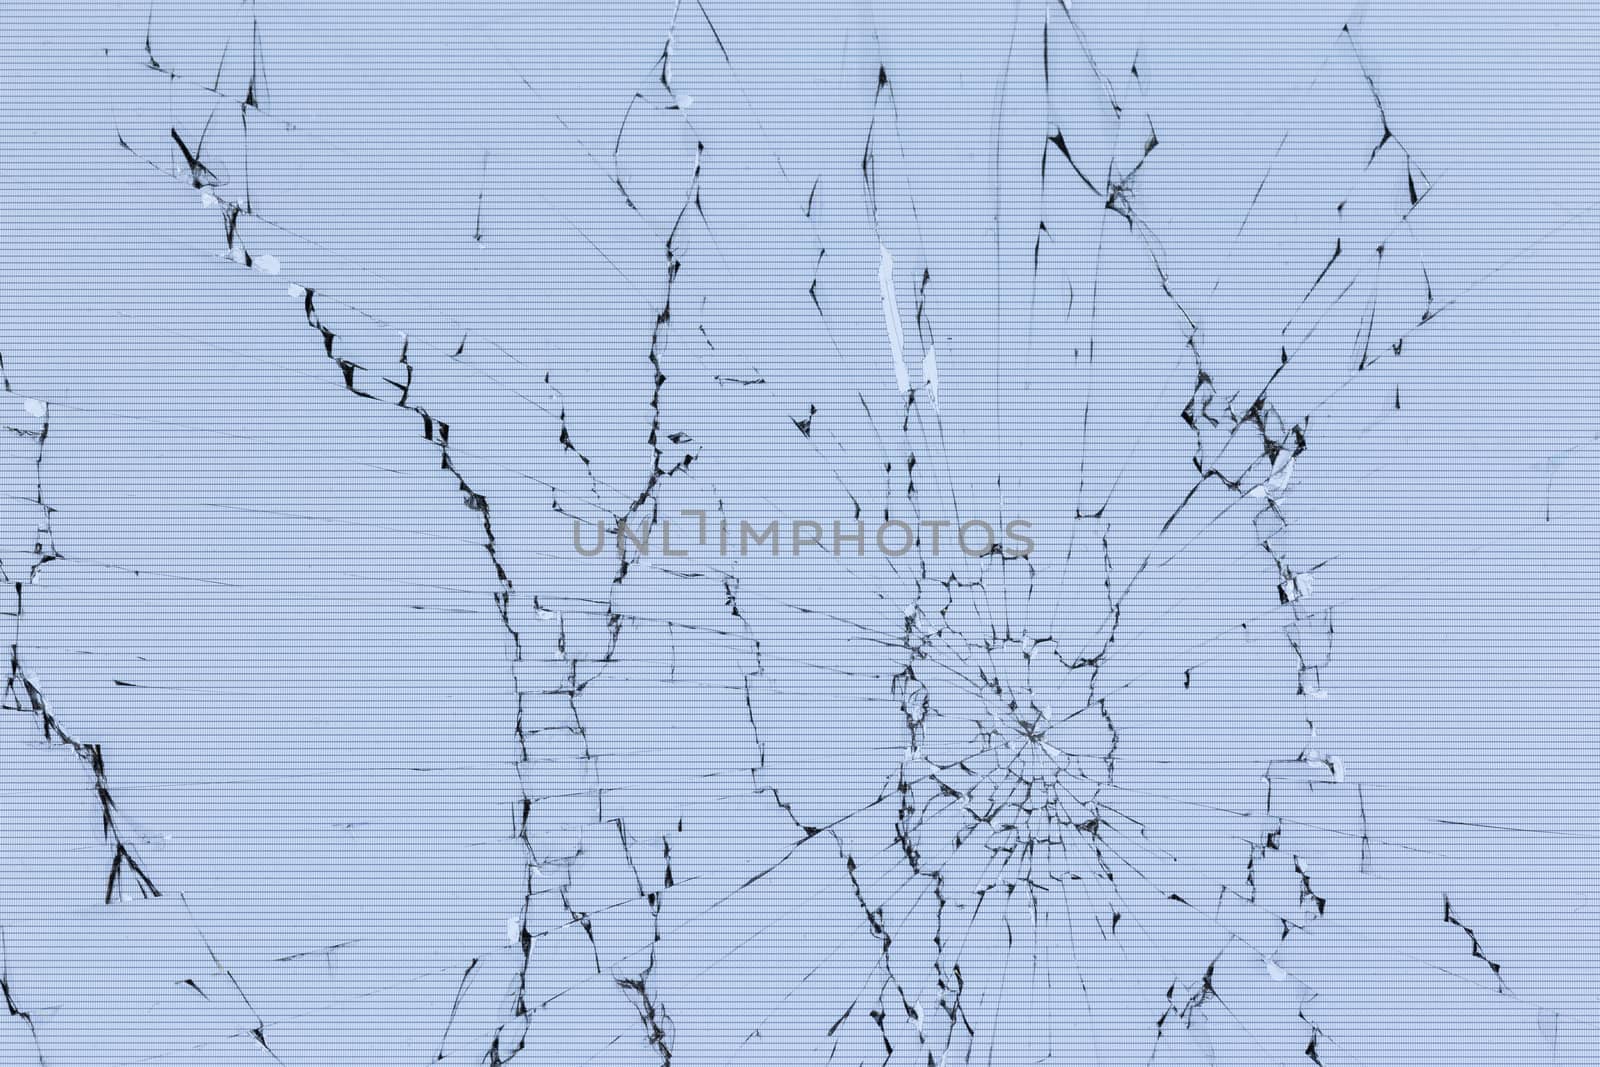 flat texture of cracked glass tft lcd screen with localized radial cracks by z1b